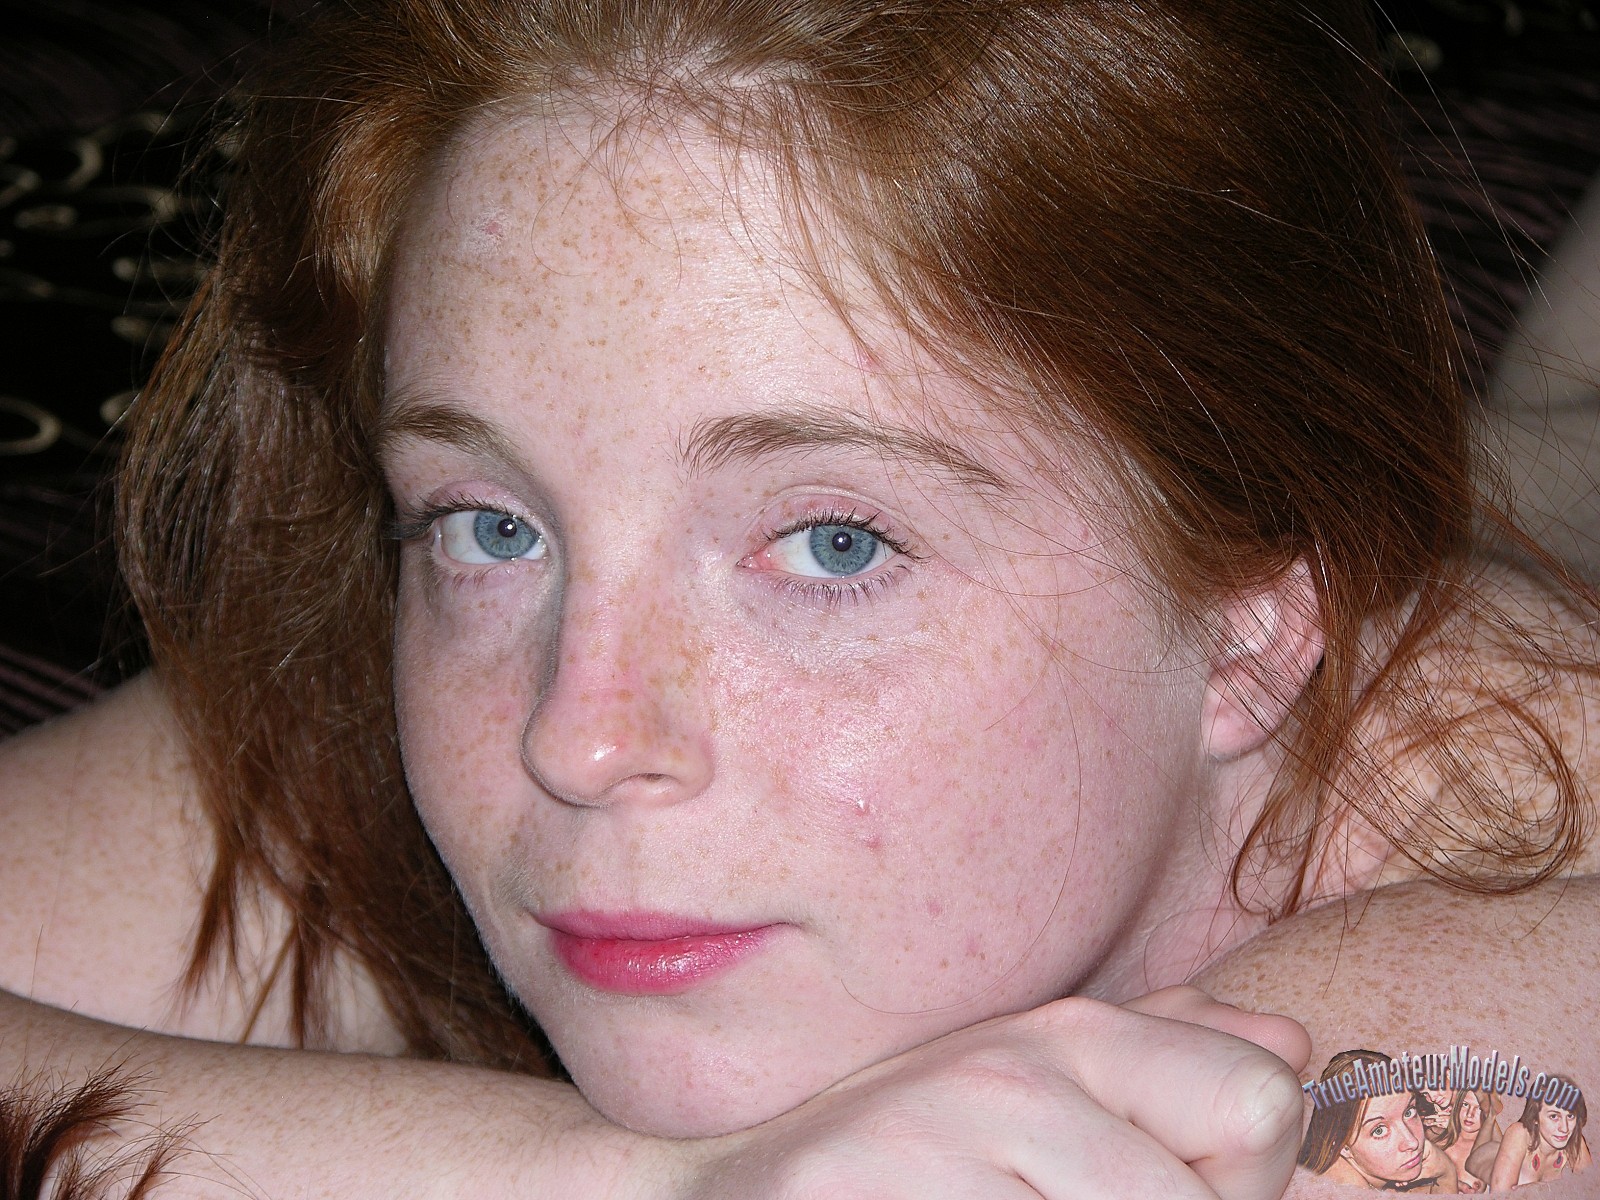 Rehdead Amateur Teen With Freckles Shows Hairy Pussy photo